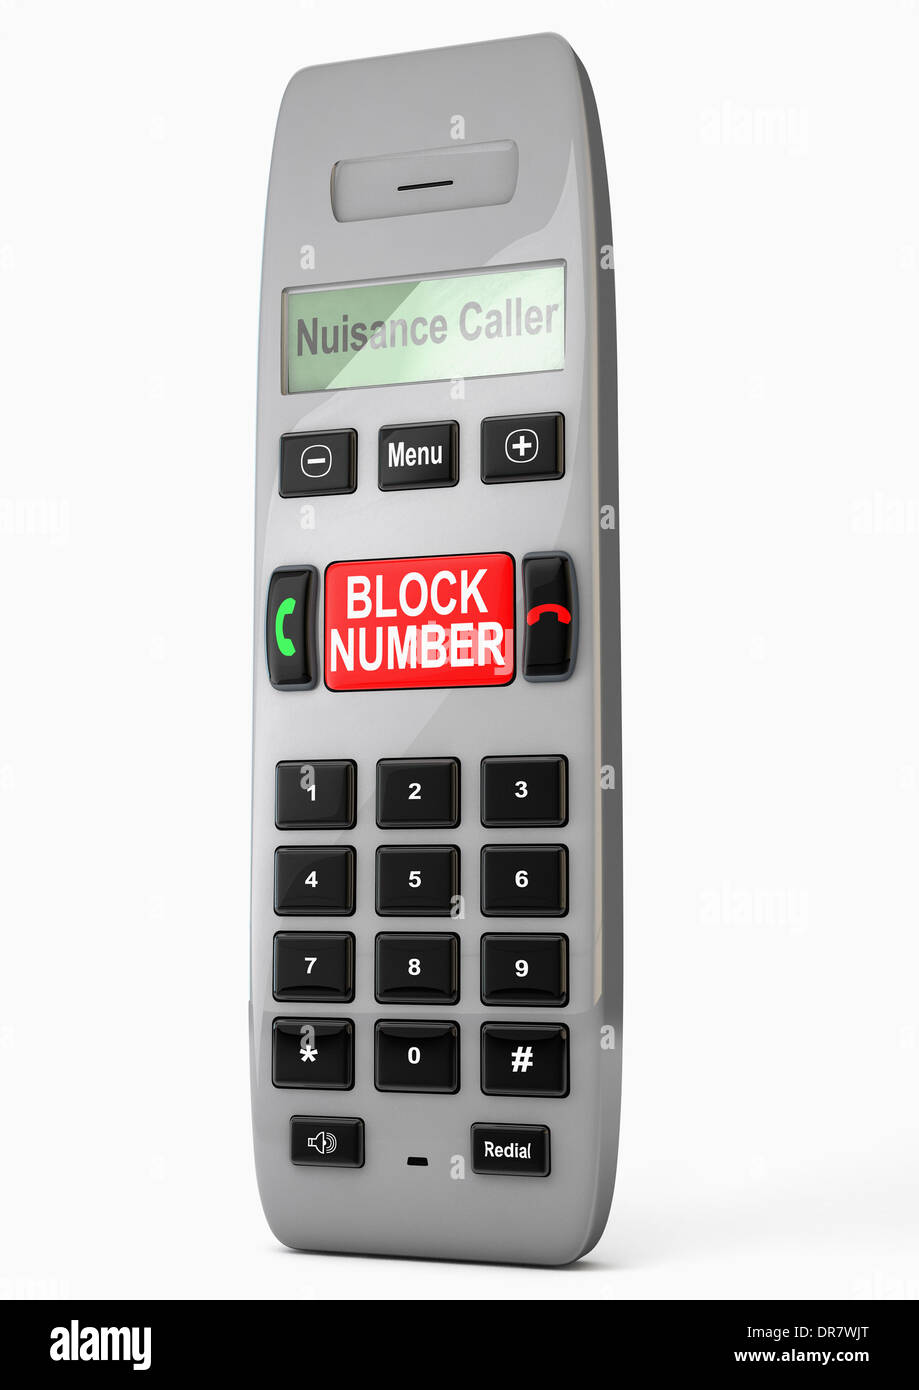 Phone handset with screen display reading 'Nuisance Caller' and a large red button saying BLOCK NUMBER Stock Photo